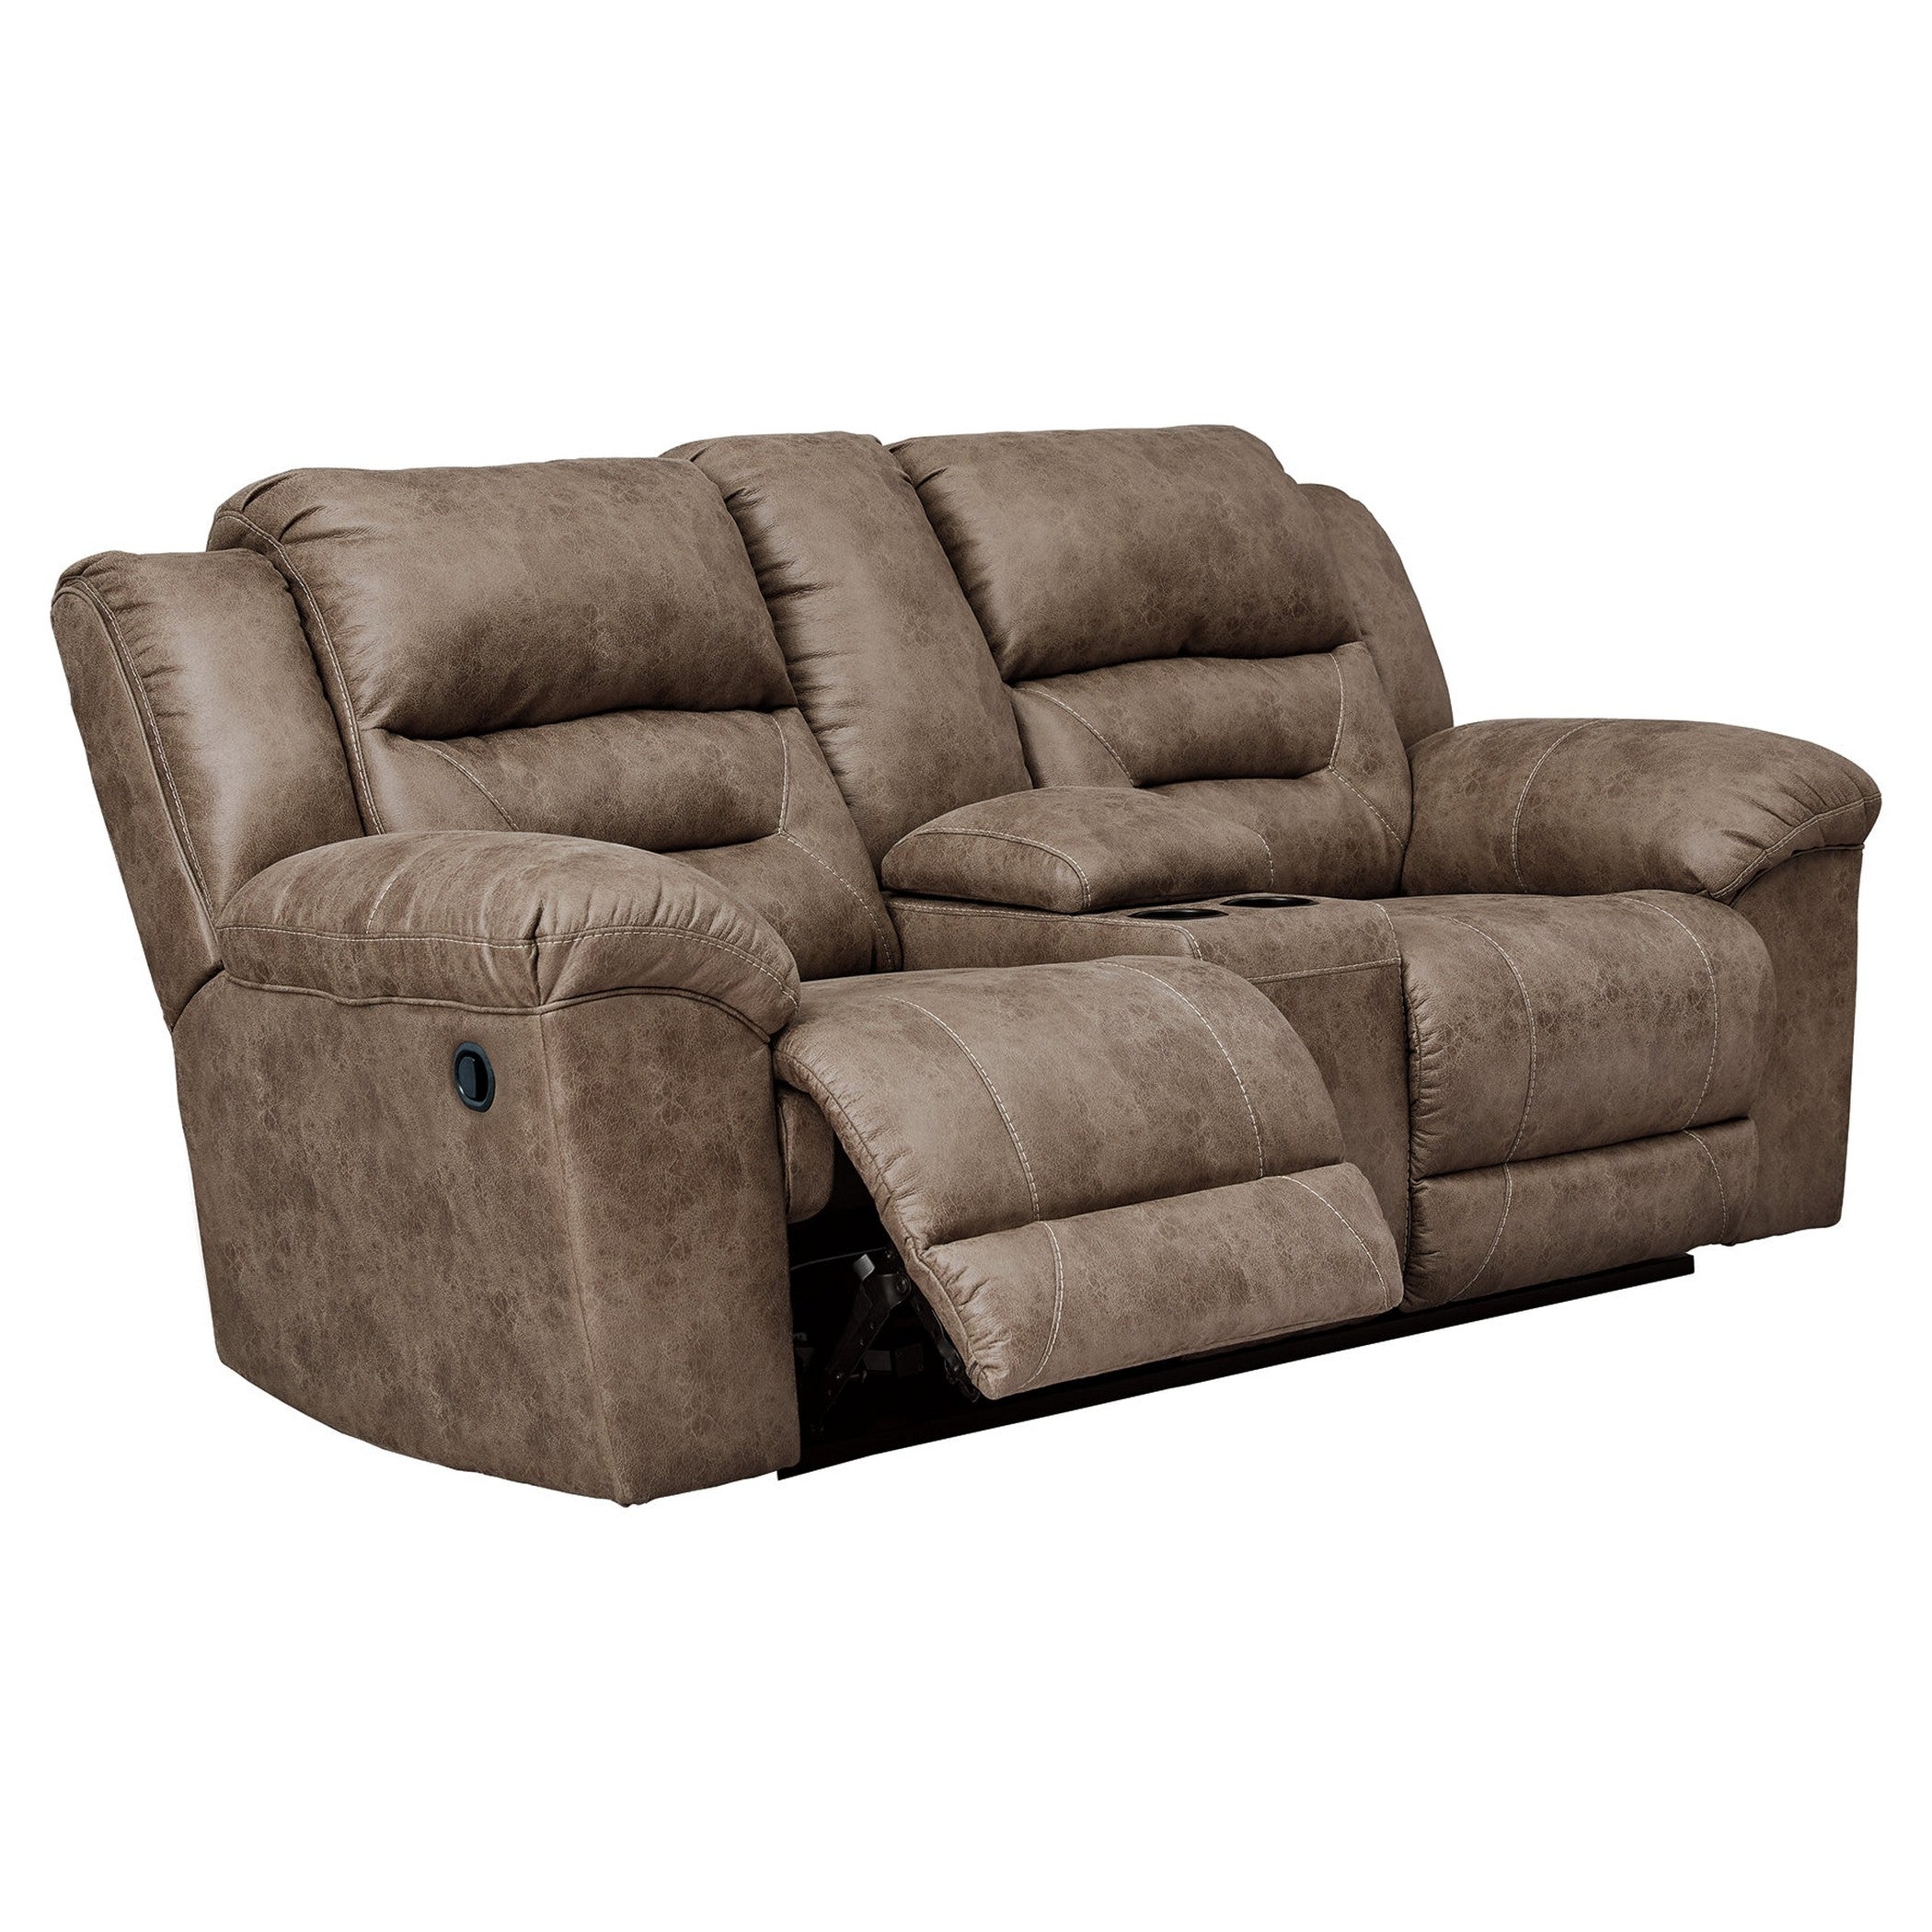 Stoneland Reclining Loveseat with Console Ash-3990594